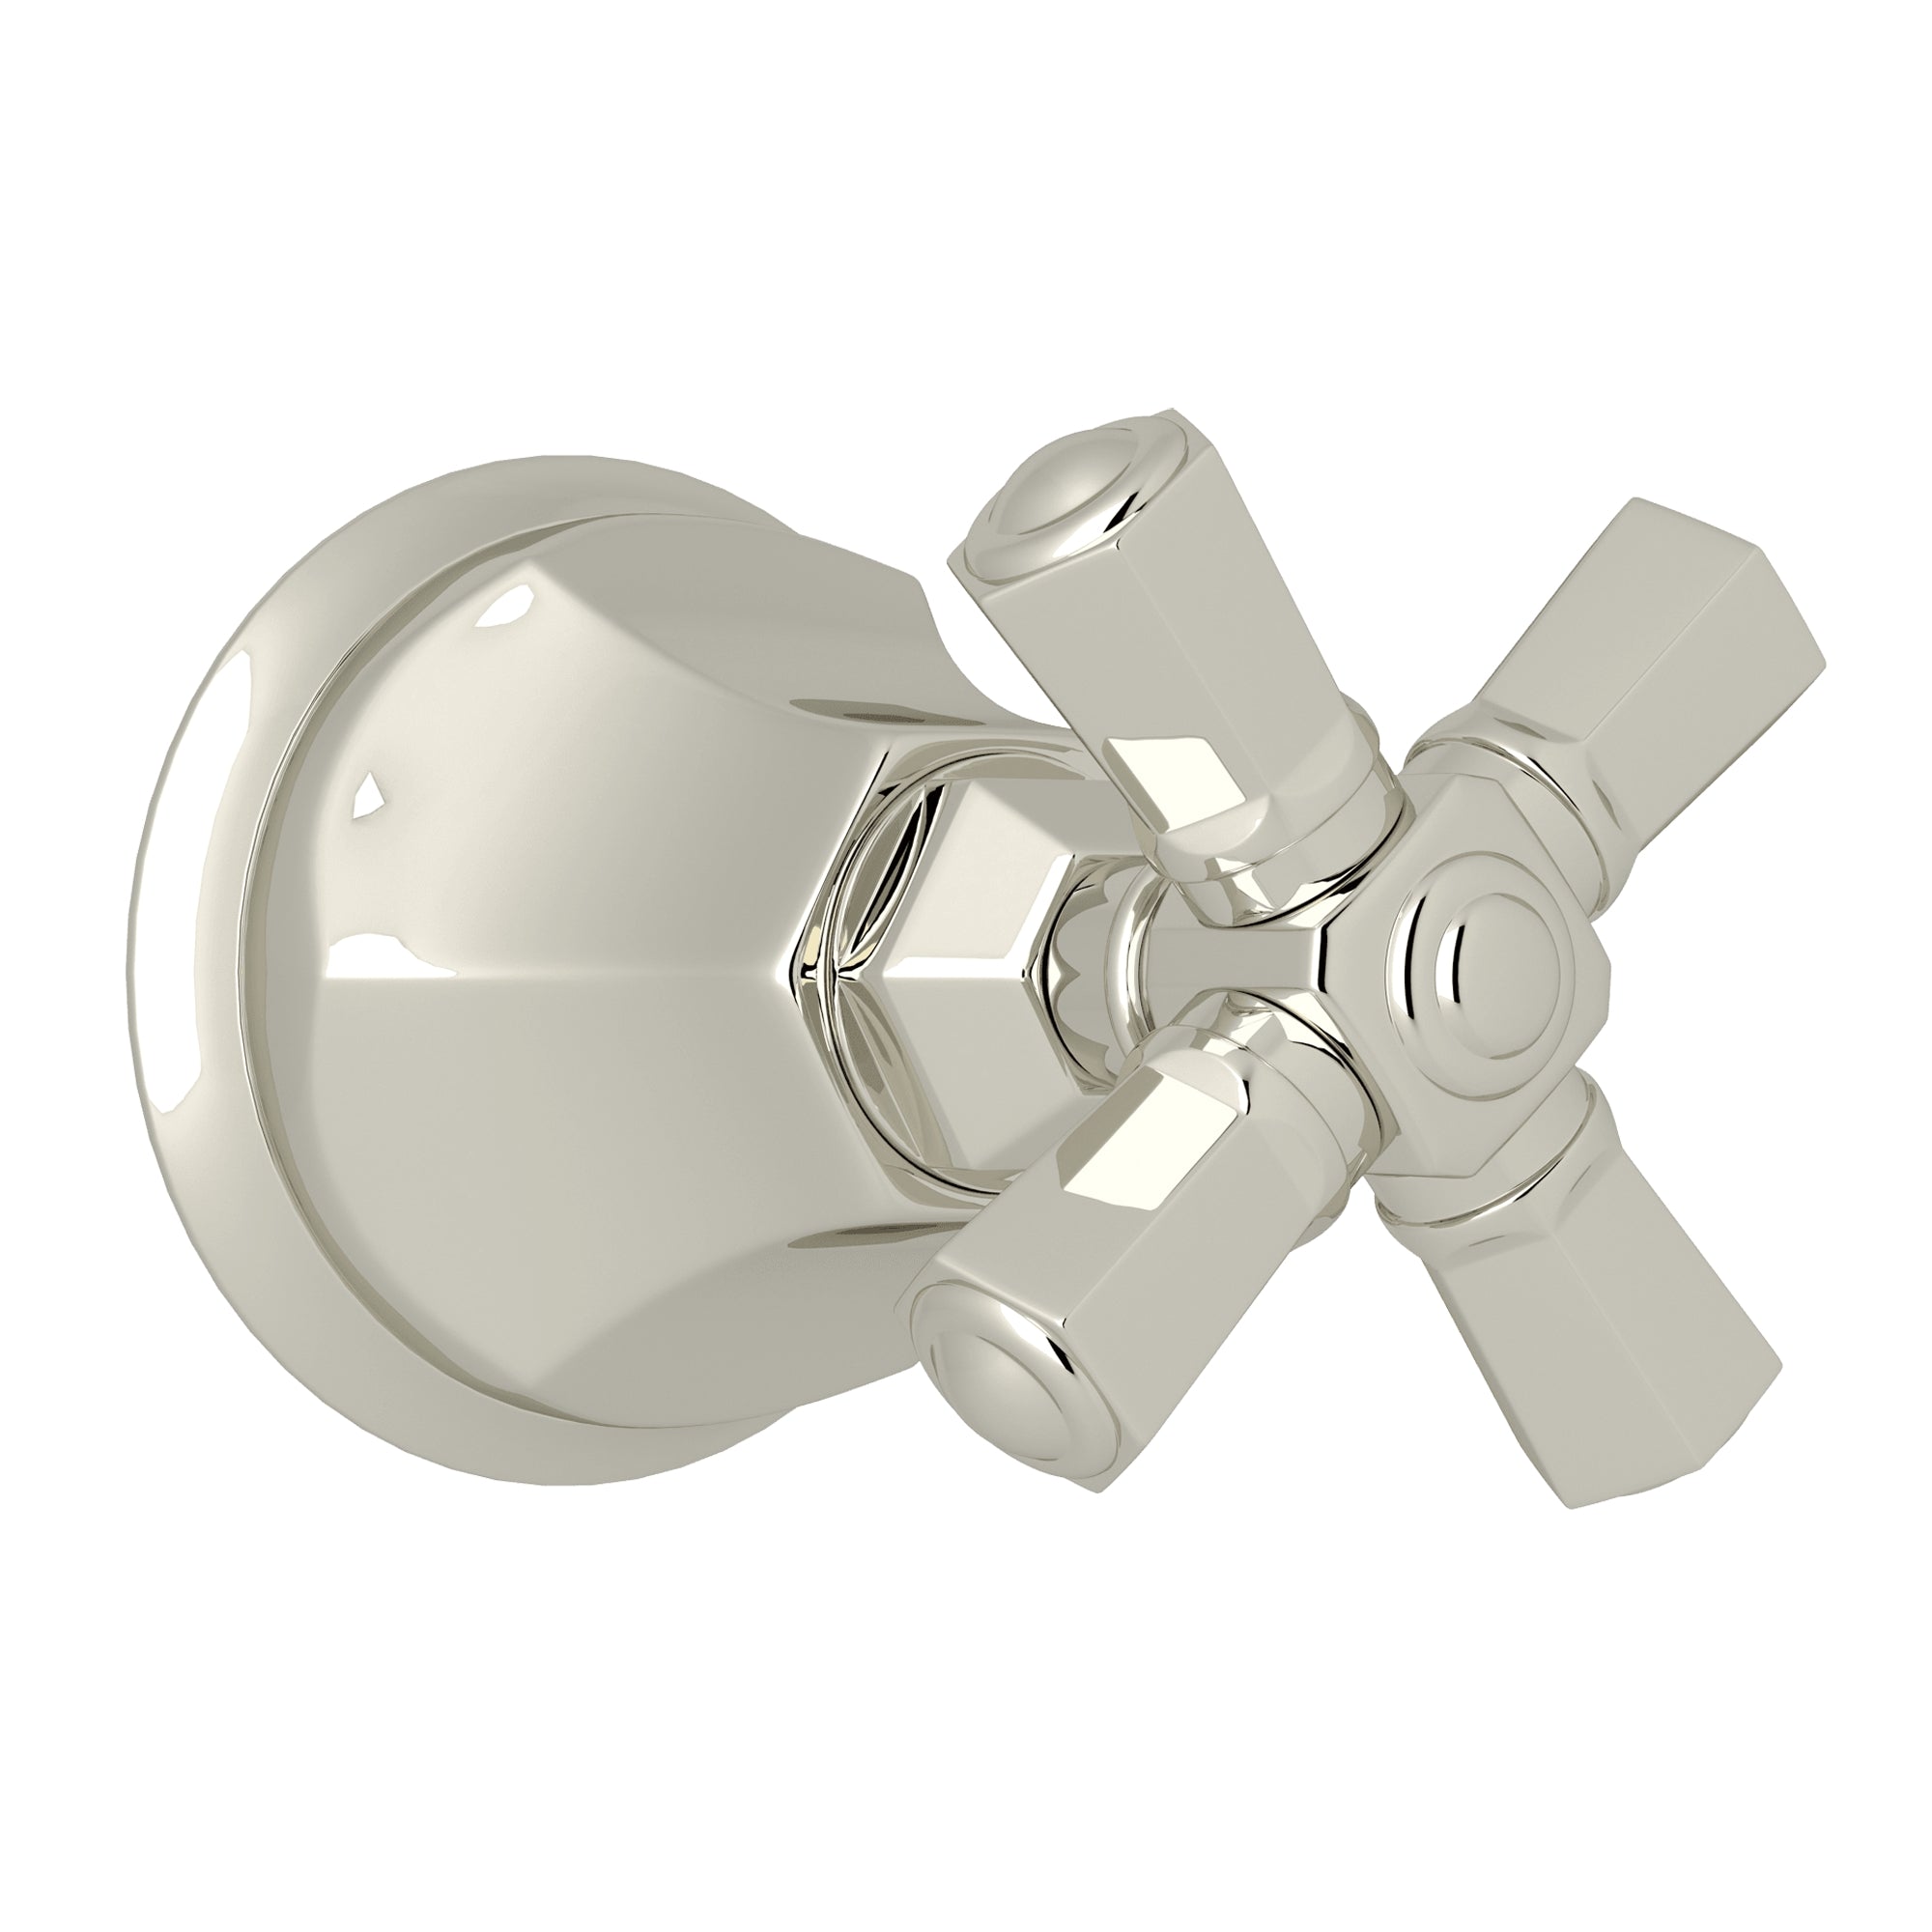 ROHL A4812 Palladian Trim For Volume Control And Diverter